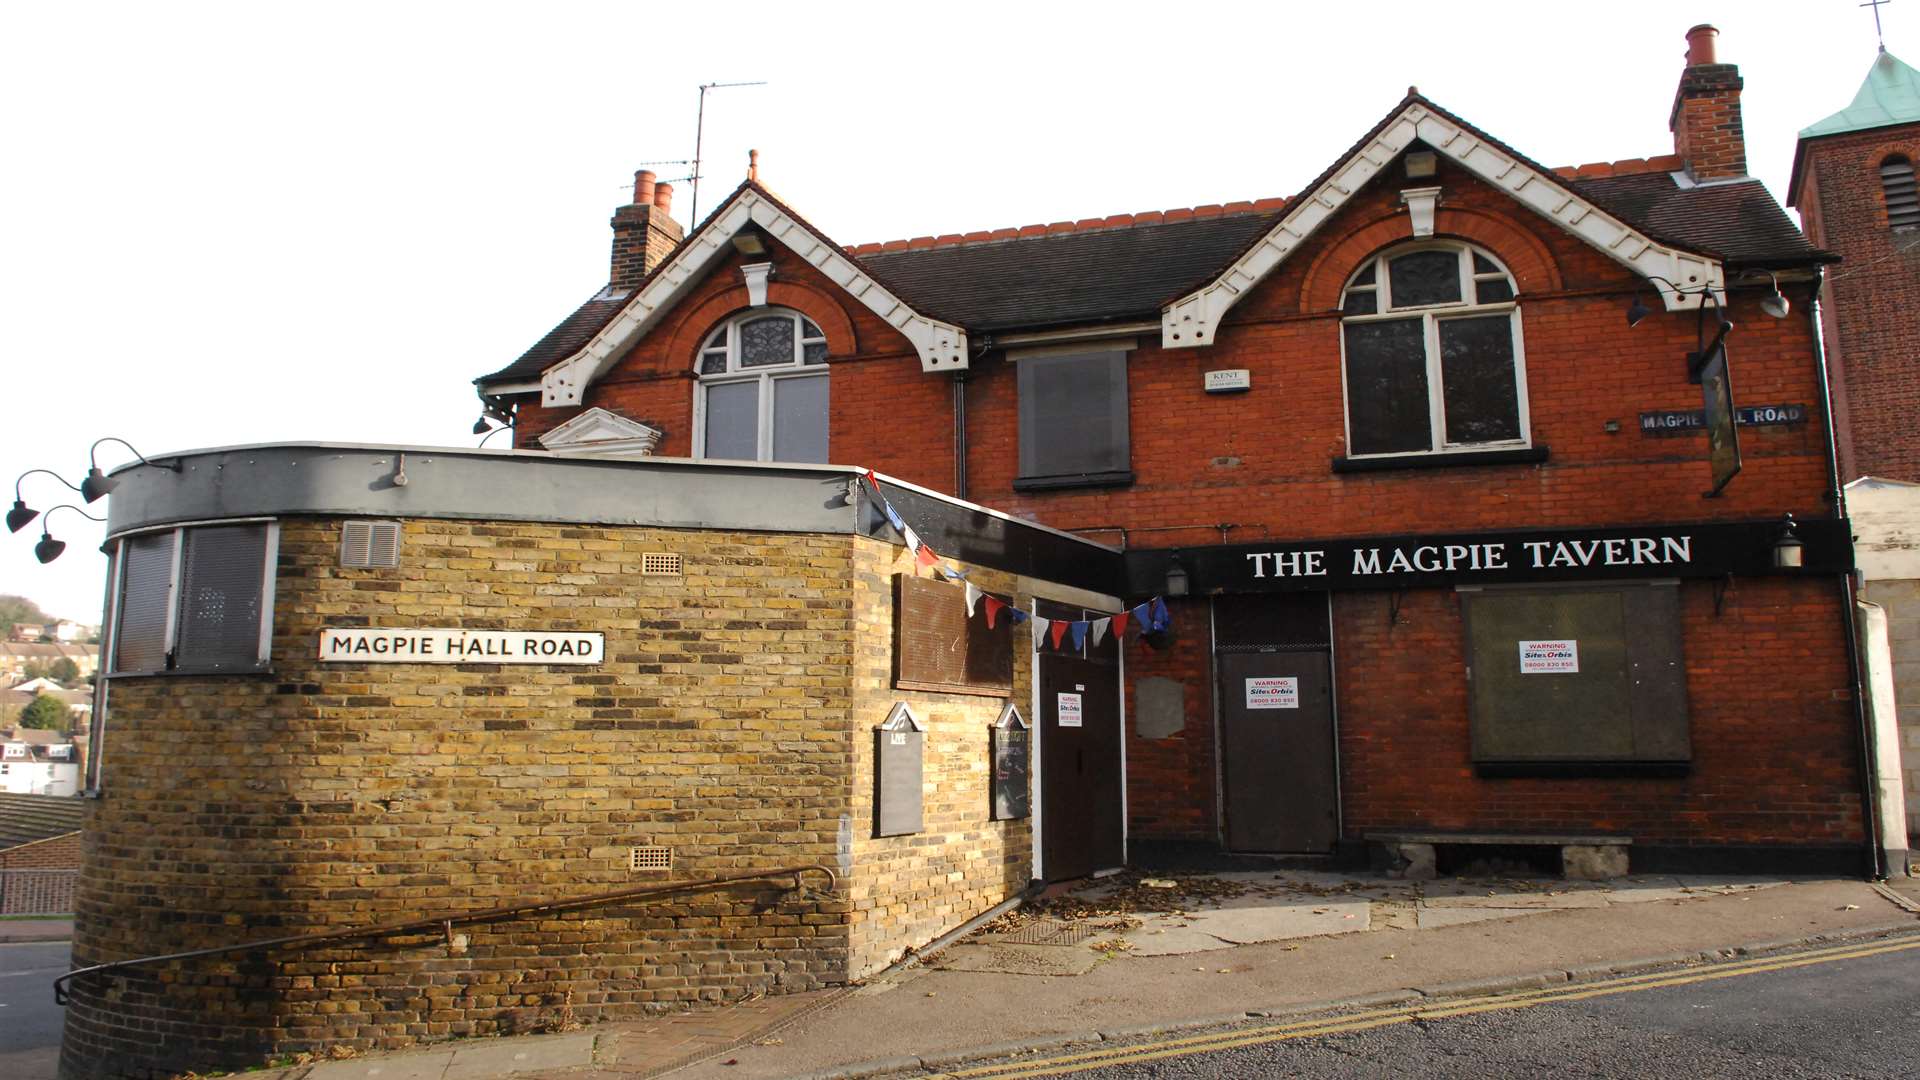 The Magpie Tavern before it was converted